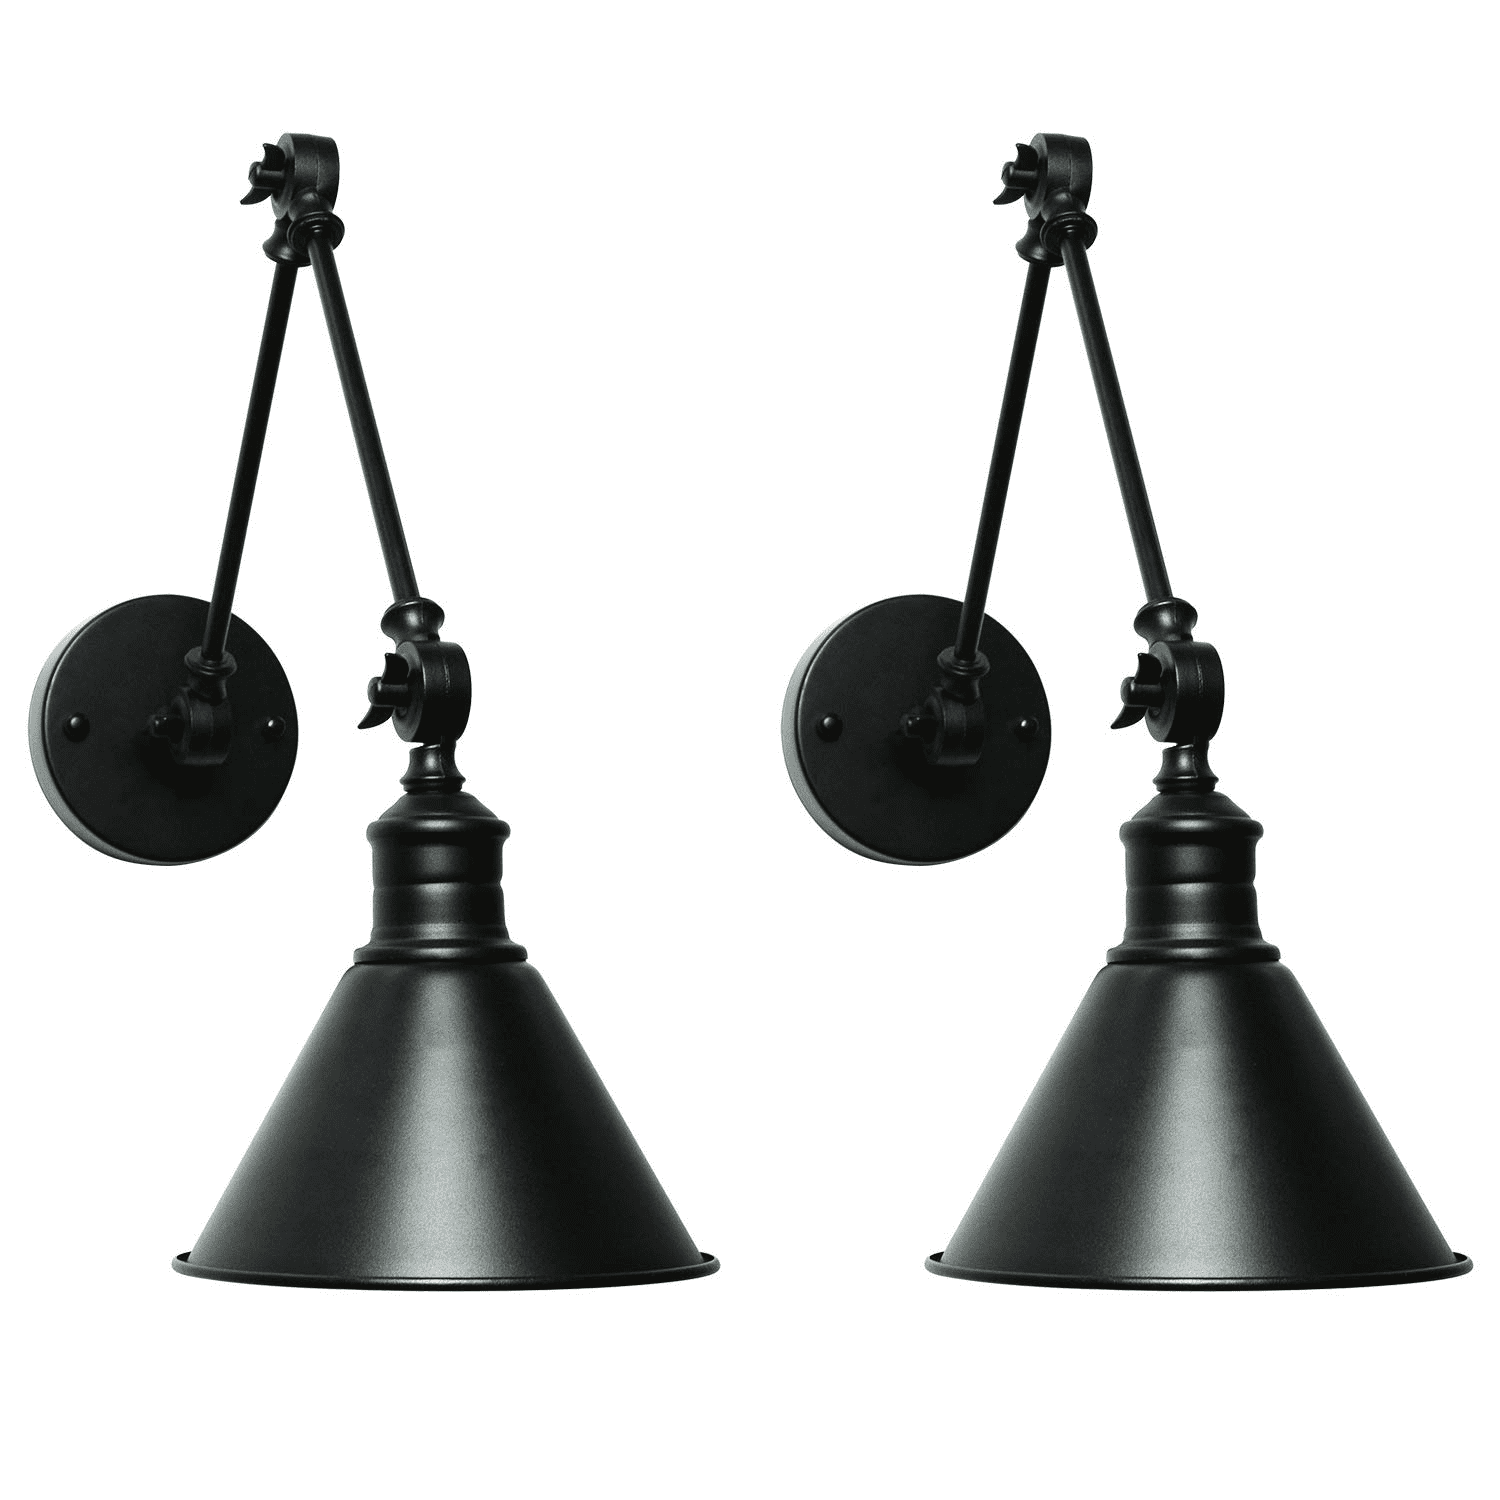 Details about   Black 1-Light Swing Arm Wall Lamp Industrial Metal Adjustable Wall Sconce light